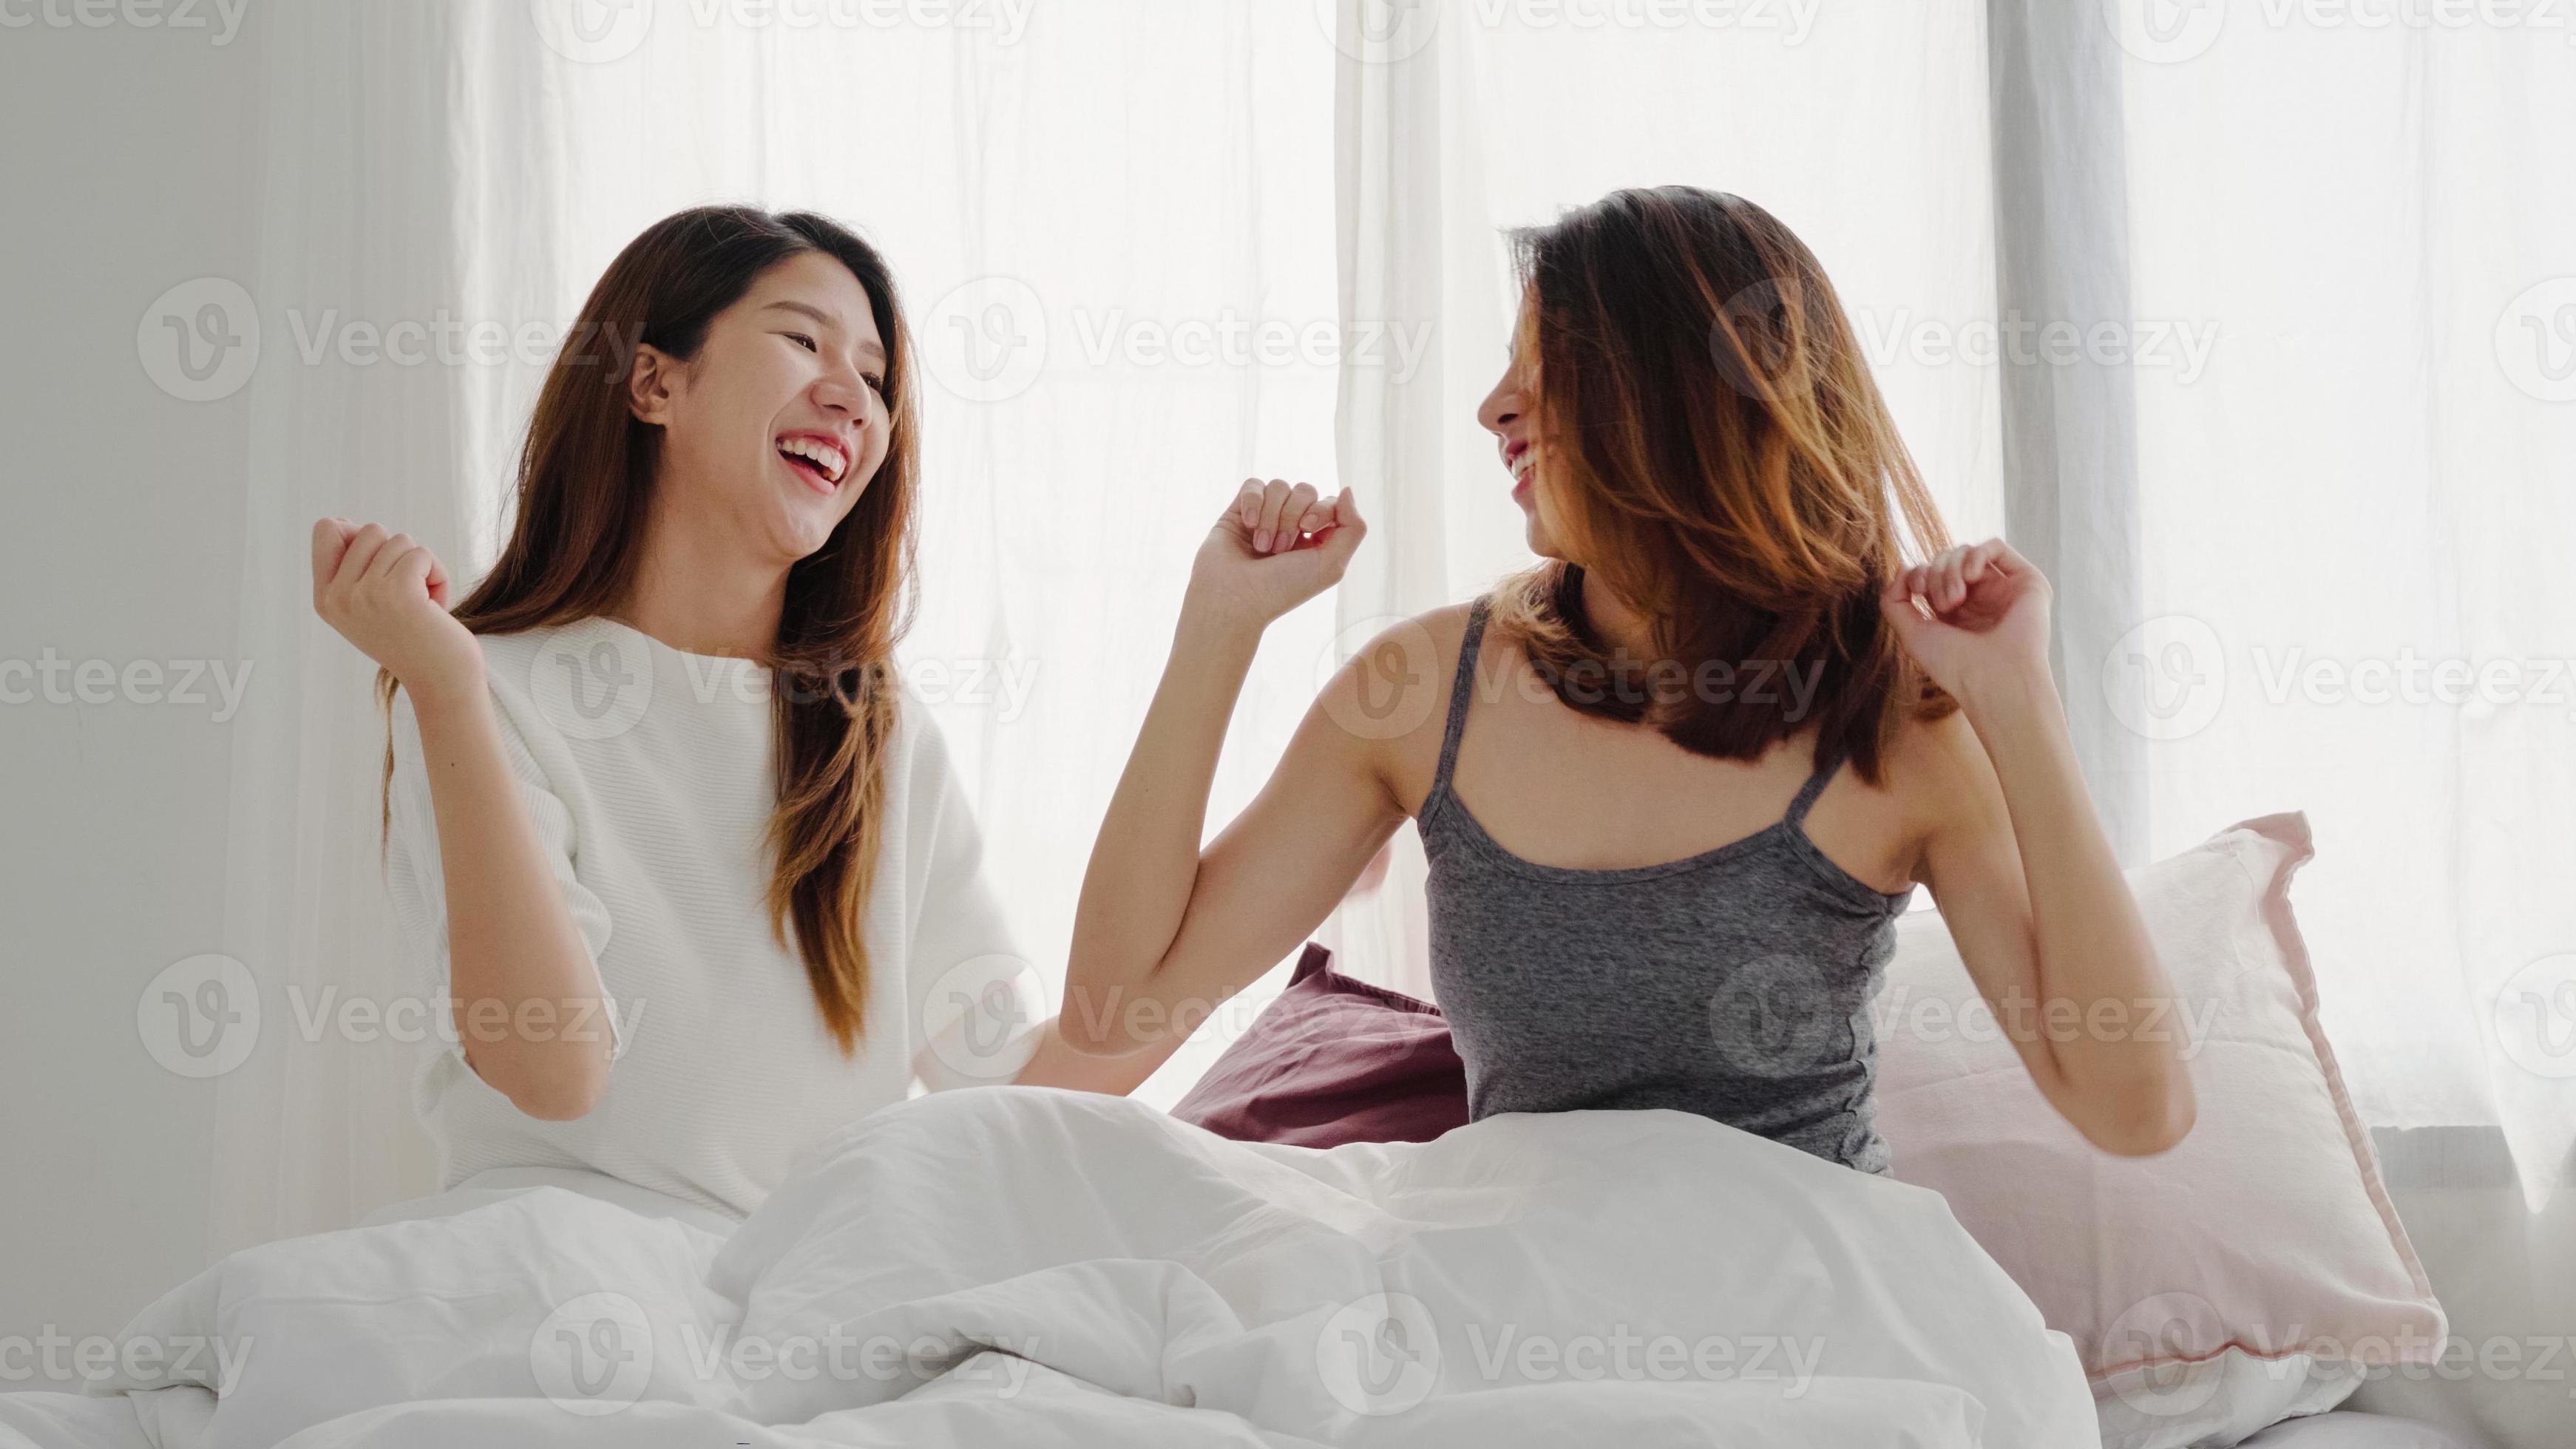 amie pagtalunan recommends lesbian friends in bed pic